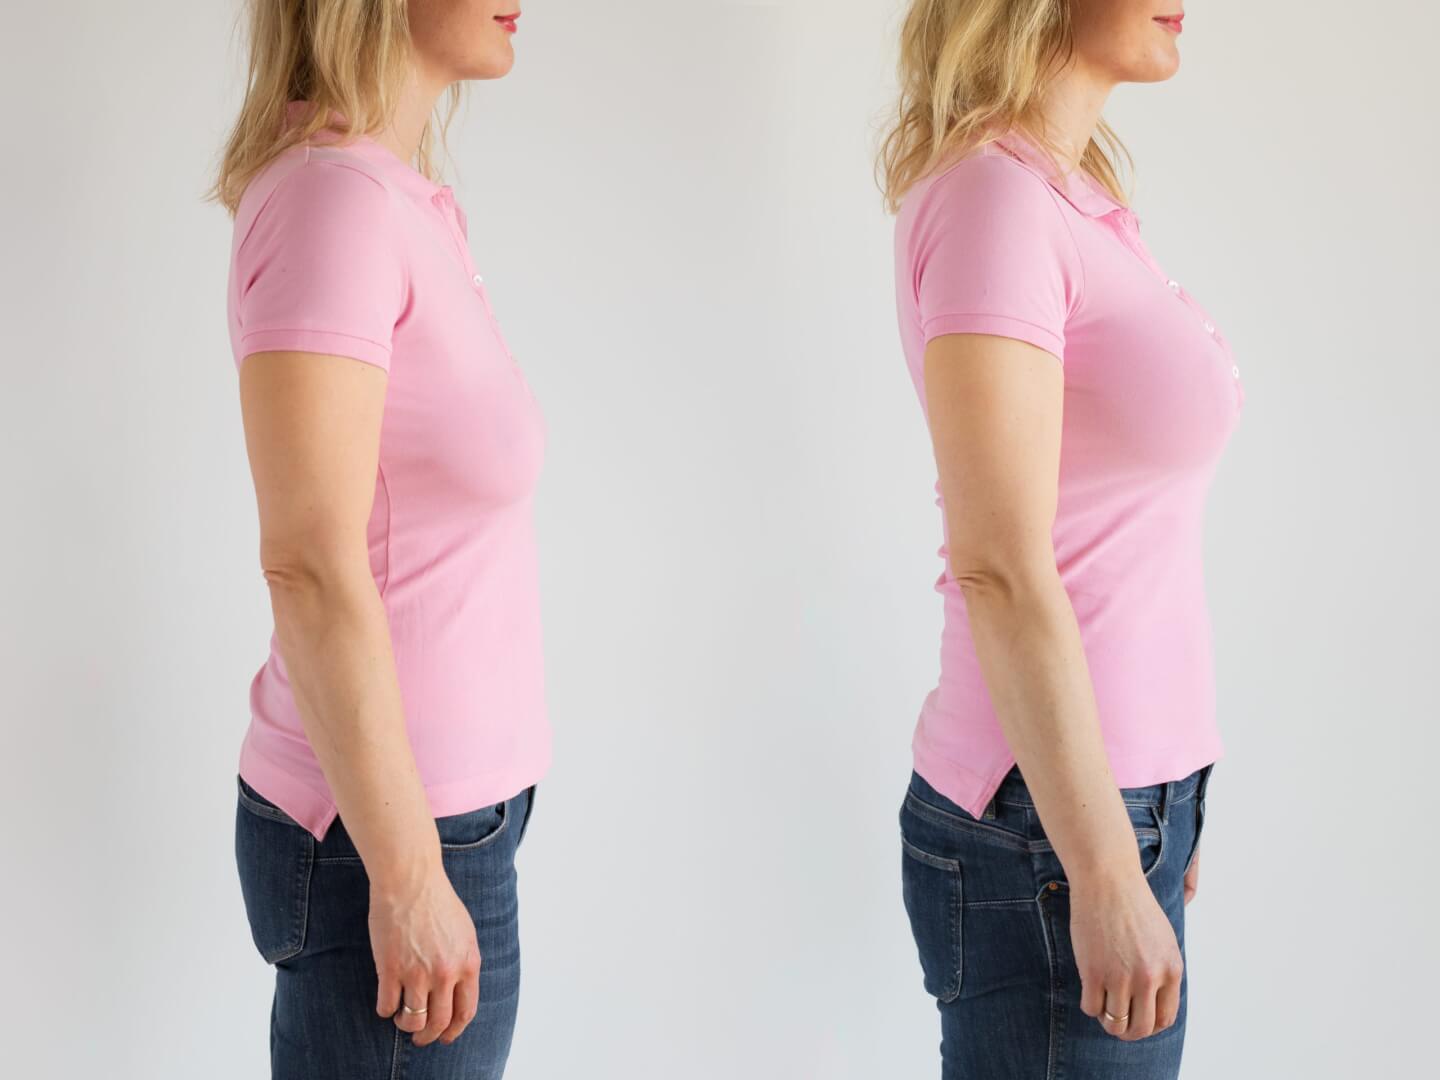 Breast lift After And before Image